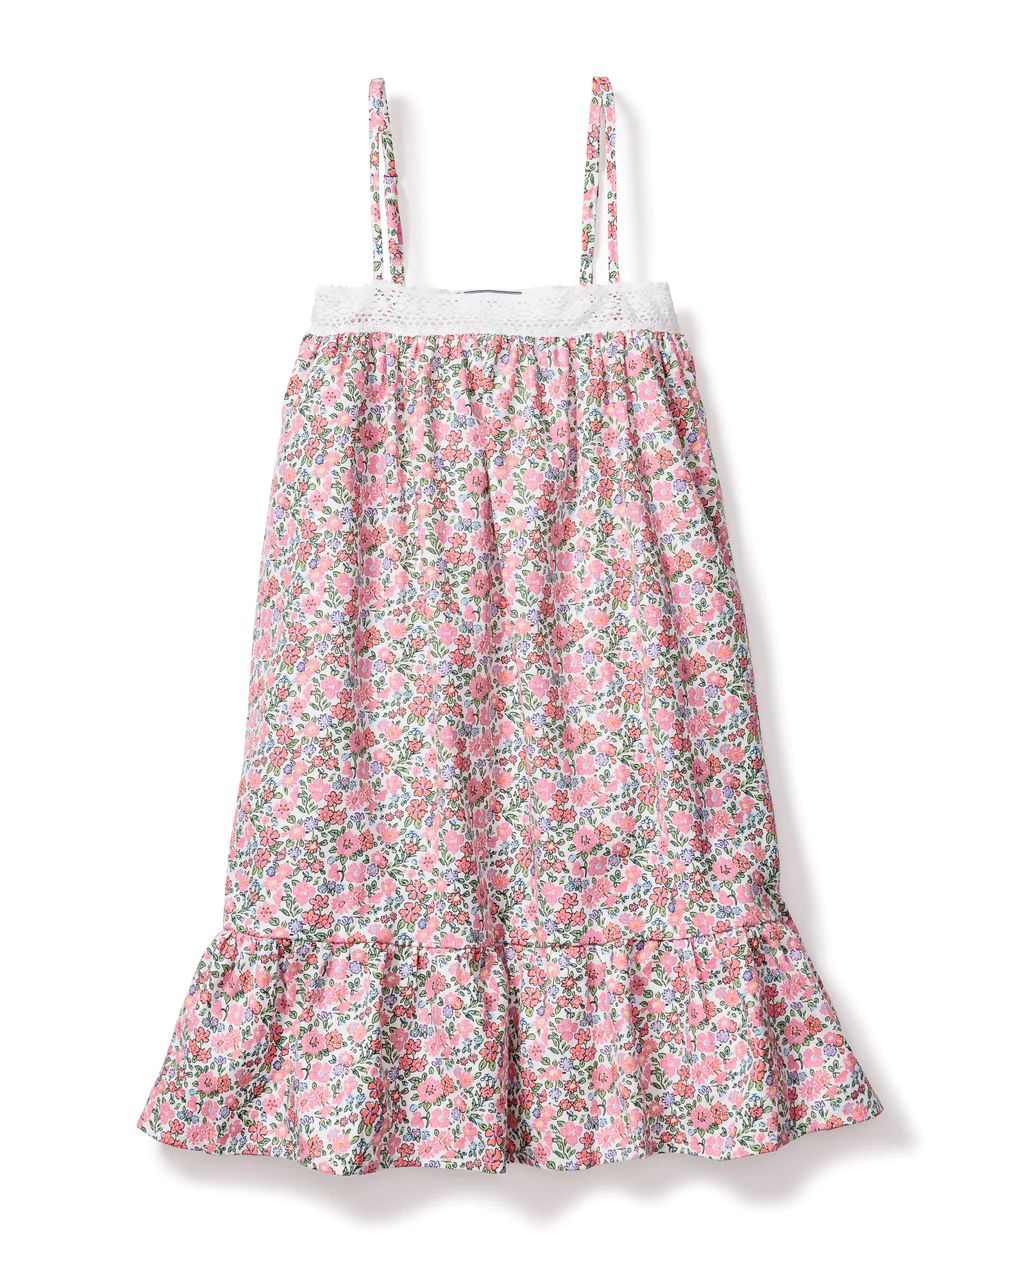 Kid'sTwill Lily Nightgown in Fleurs de Rose | Petite Plume